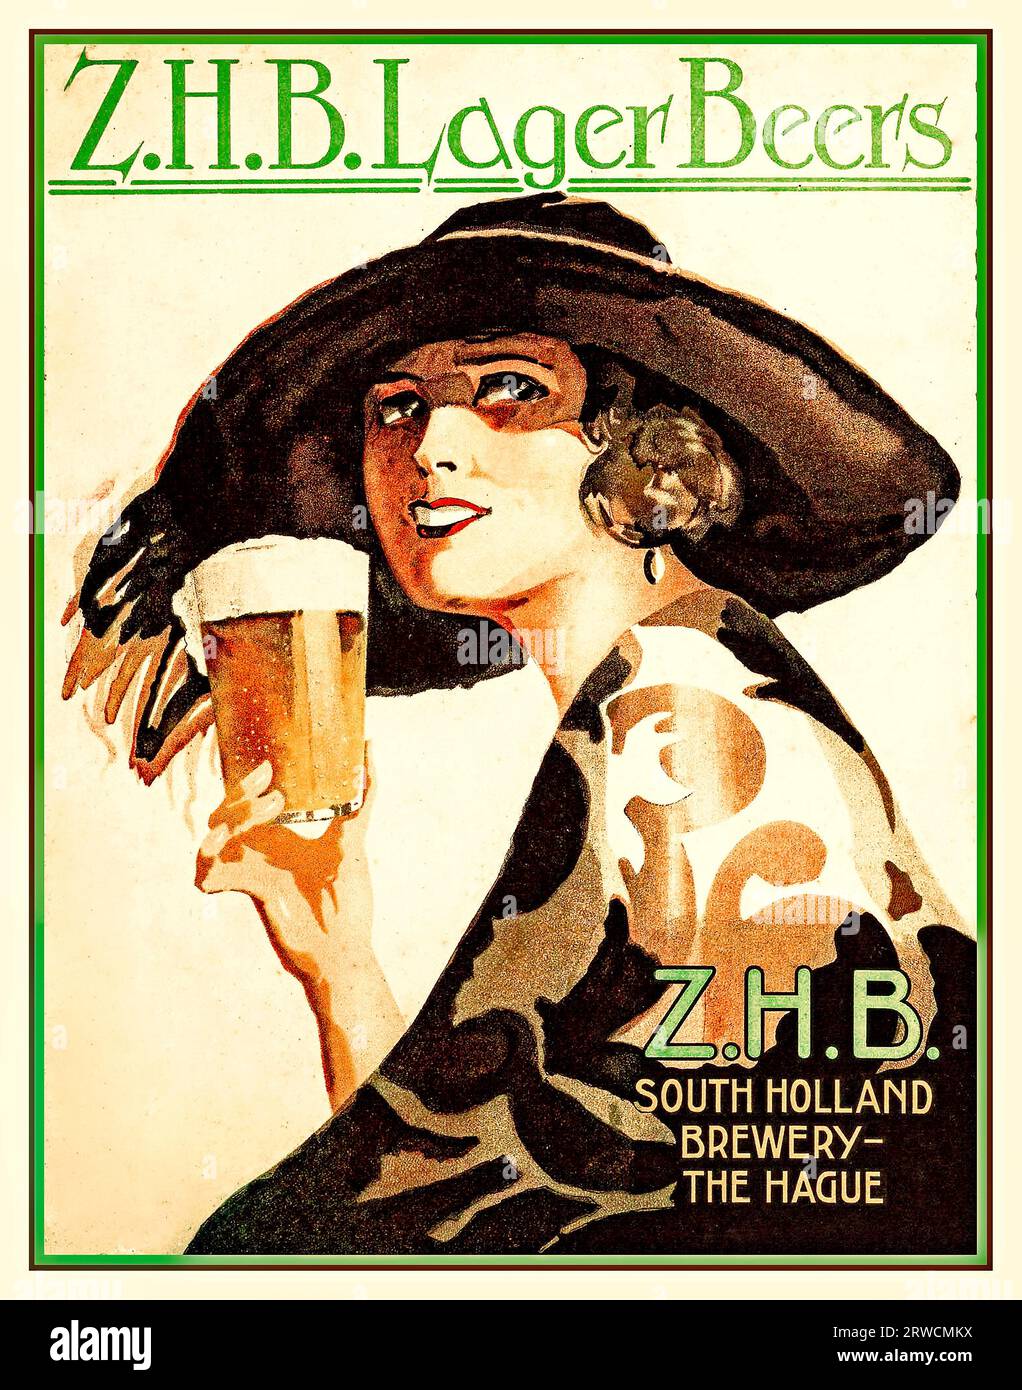 Cartolina vintage anni '1920 di Jacob Jansma per Z.H.B. Lager Beers Z.H.B. South Holland Brewery - The Hague Holland. Z.H.B. Lager Beers, della South Holland Brewery (alias Zuid Hollandse Bierbrouwerijen Foto Stock